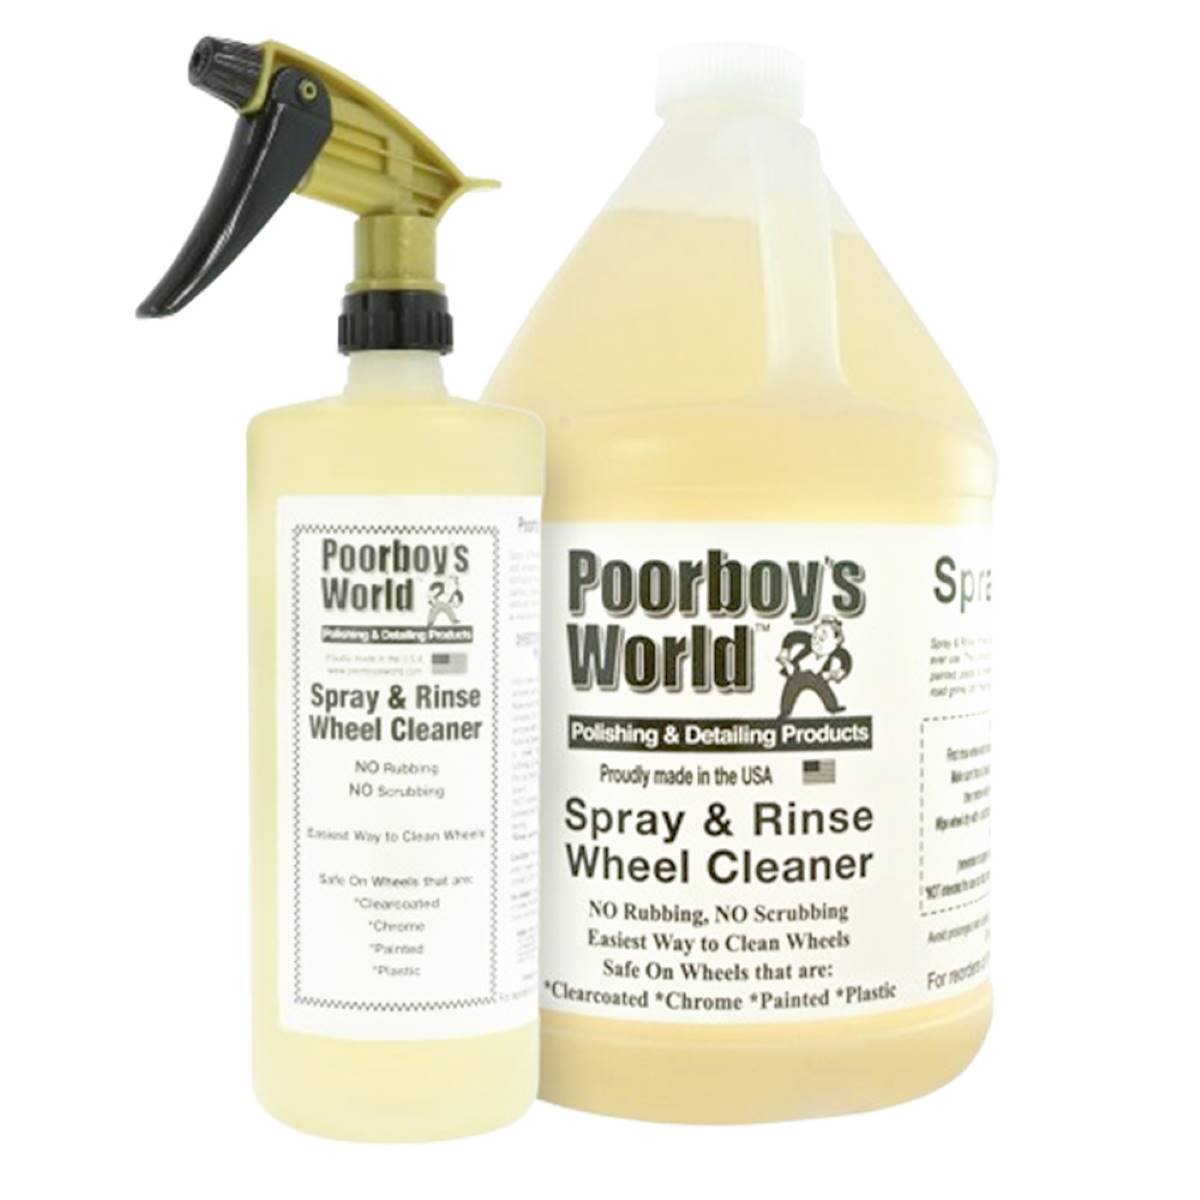 Spray and Rinse Wheel Cleaner